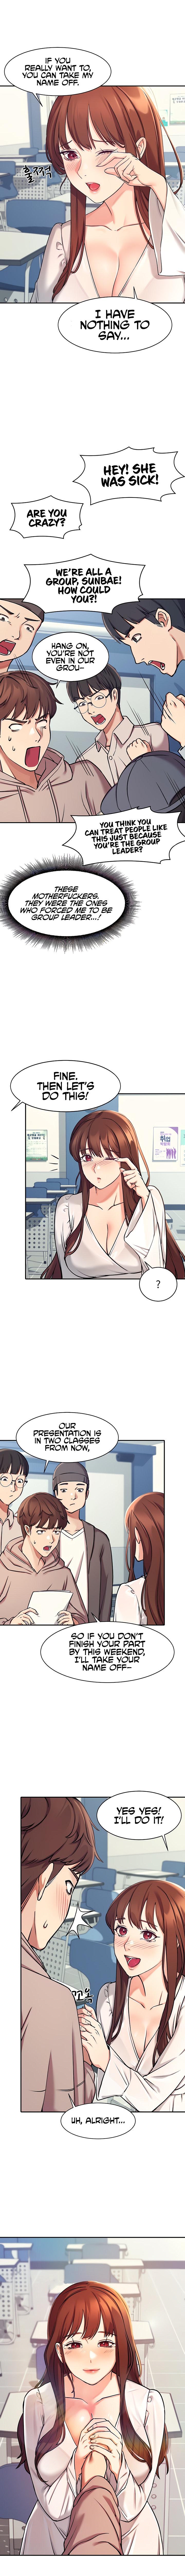 Is There No Goddess in My College? Ch.15/? 11